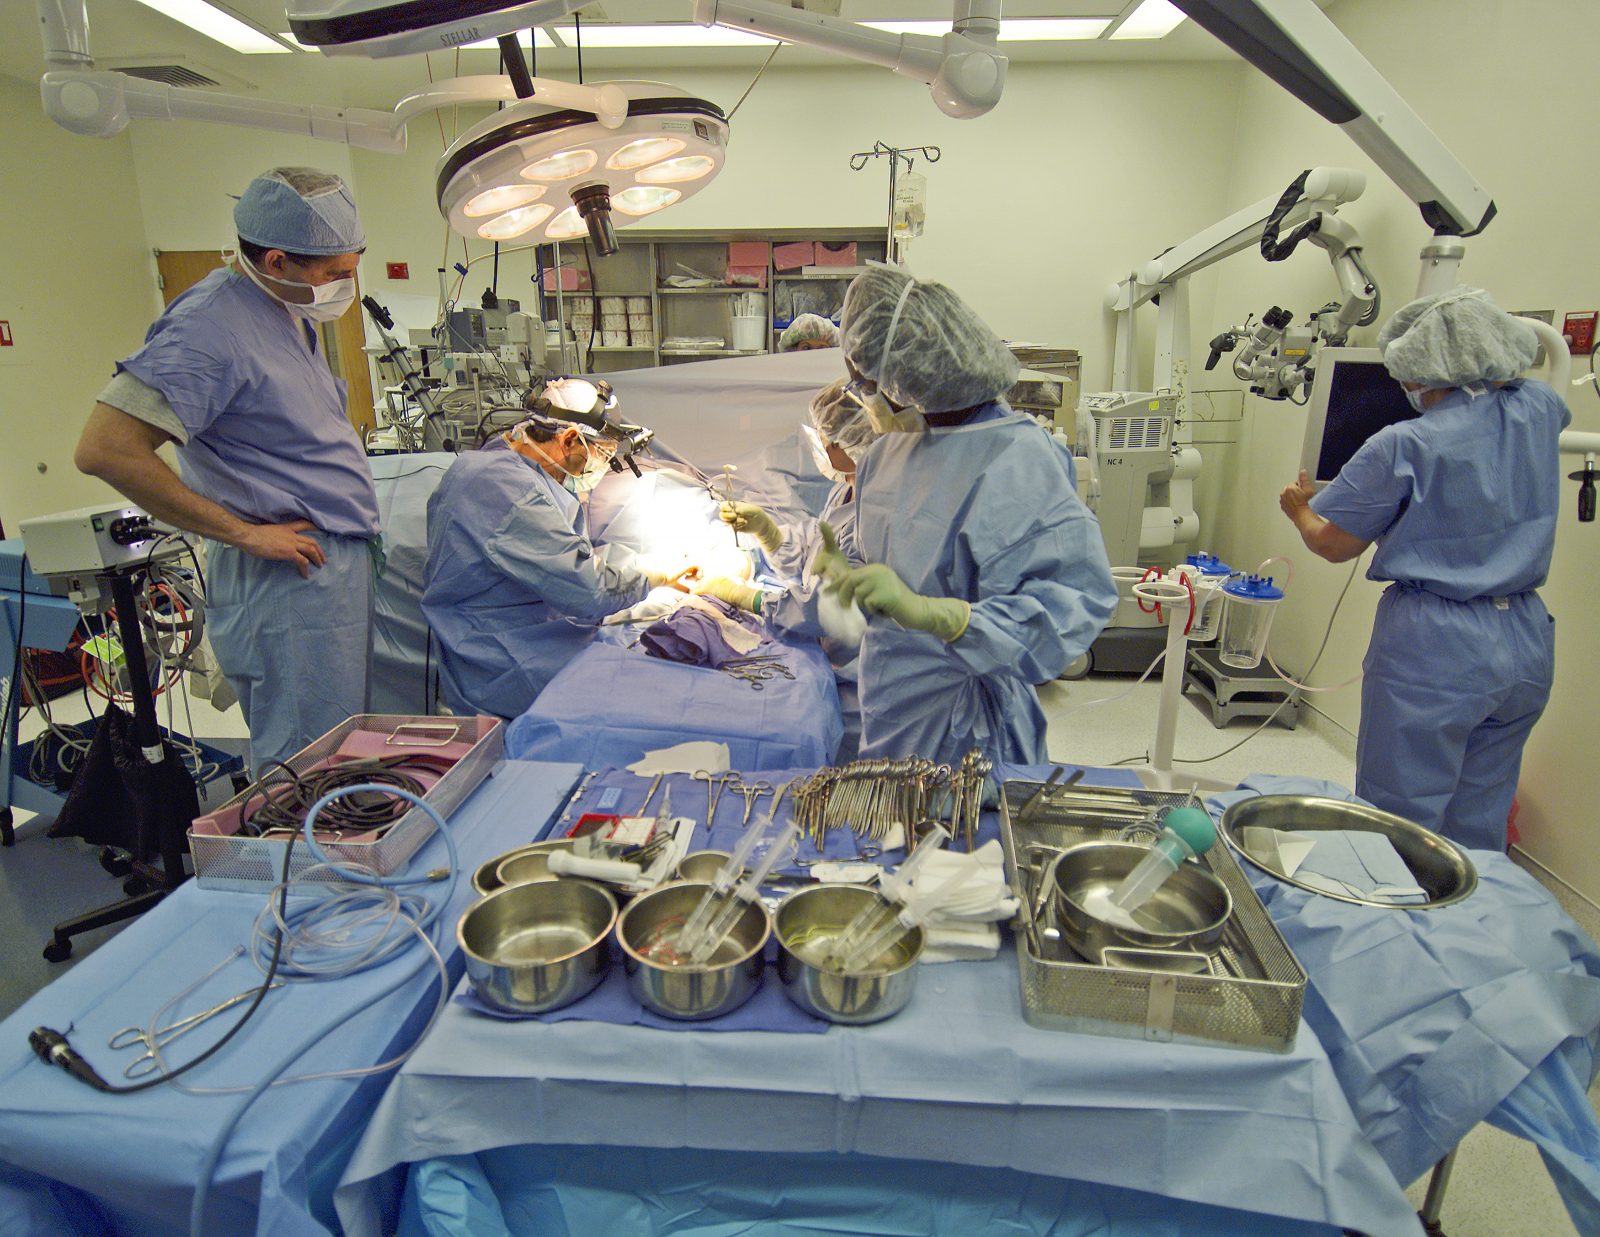 New Equipment Will Support More Than 500 Surgeries Each Year at WDMH 